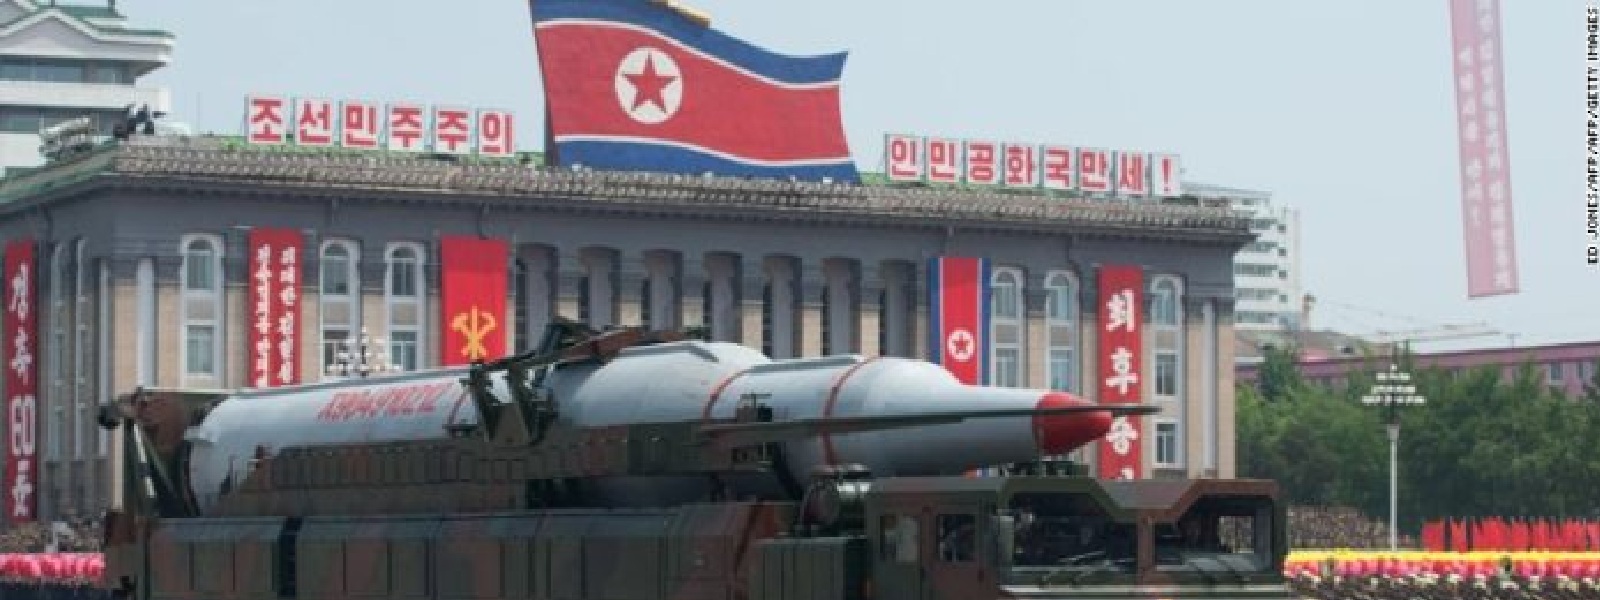 N.Korea advances its armament with tactical guided missile tests